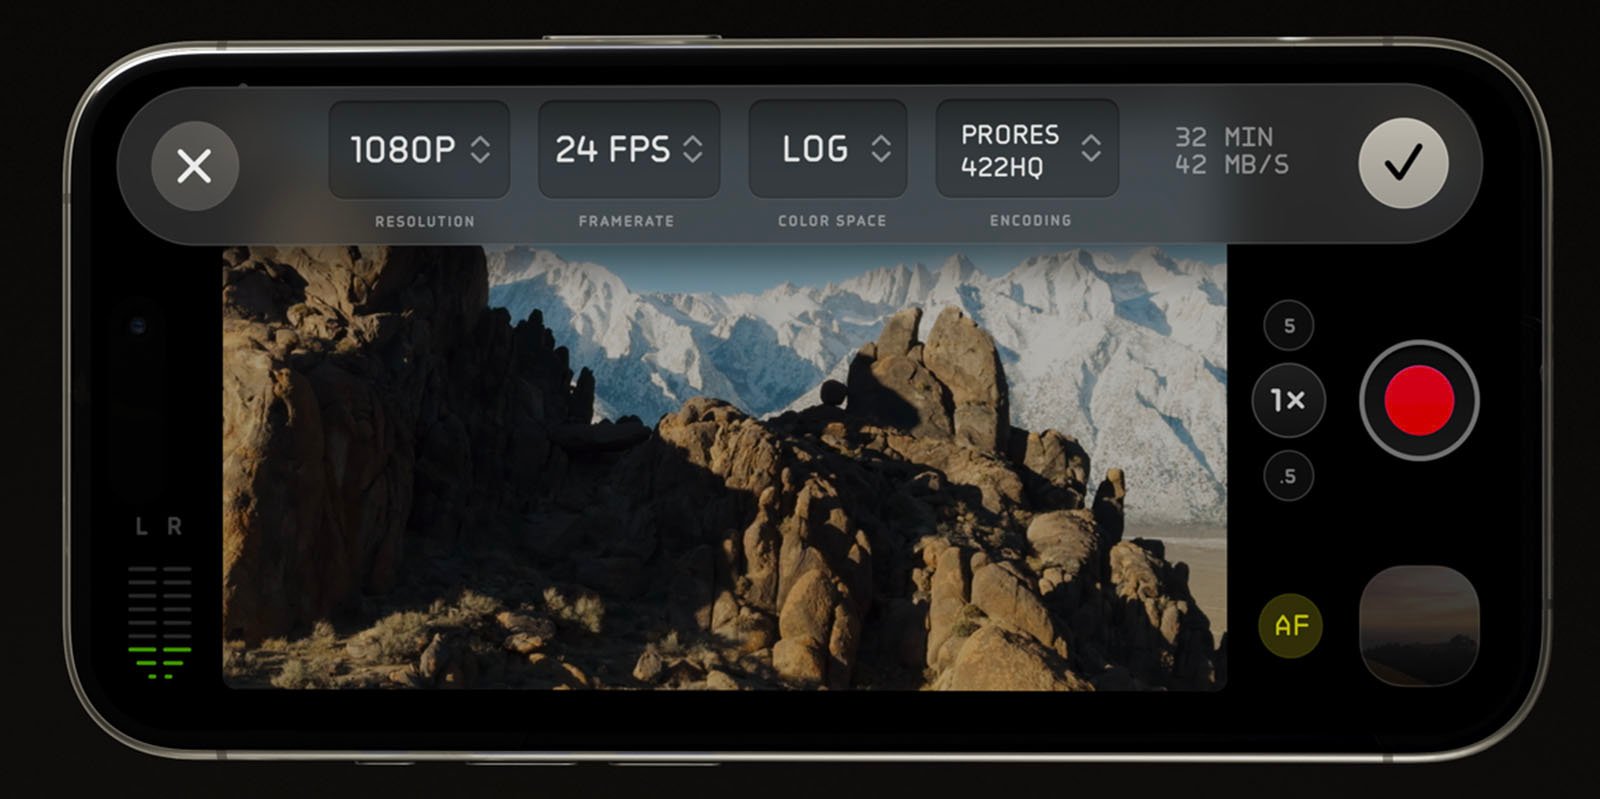 A smartphone screen displaying a camera application interface. The screen shows rocky mountains and a landscape. The top menu shows settings including resolution (1080P), frame rate (24 FPS), color space (LOG), encoding (ProRes 422HQ), and data rate (42 MB/s).